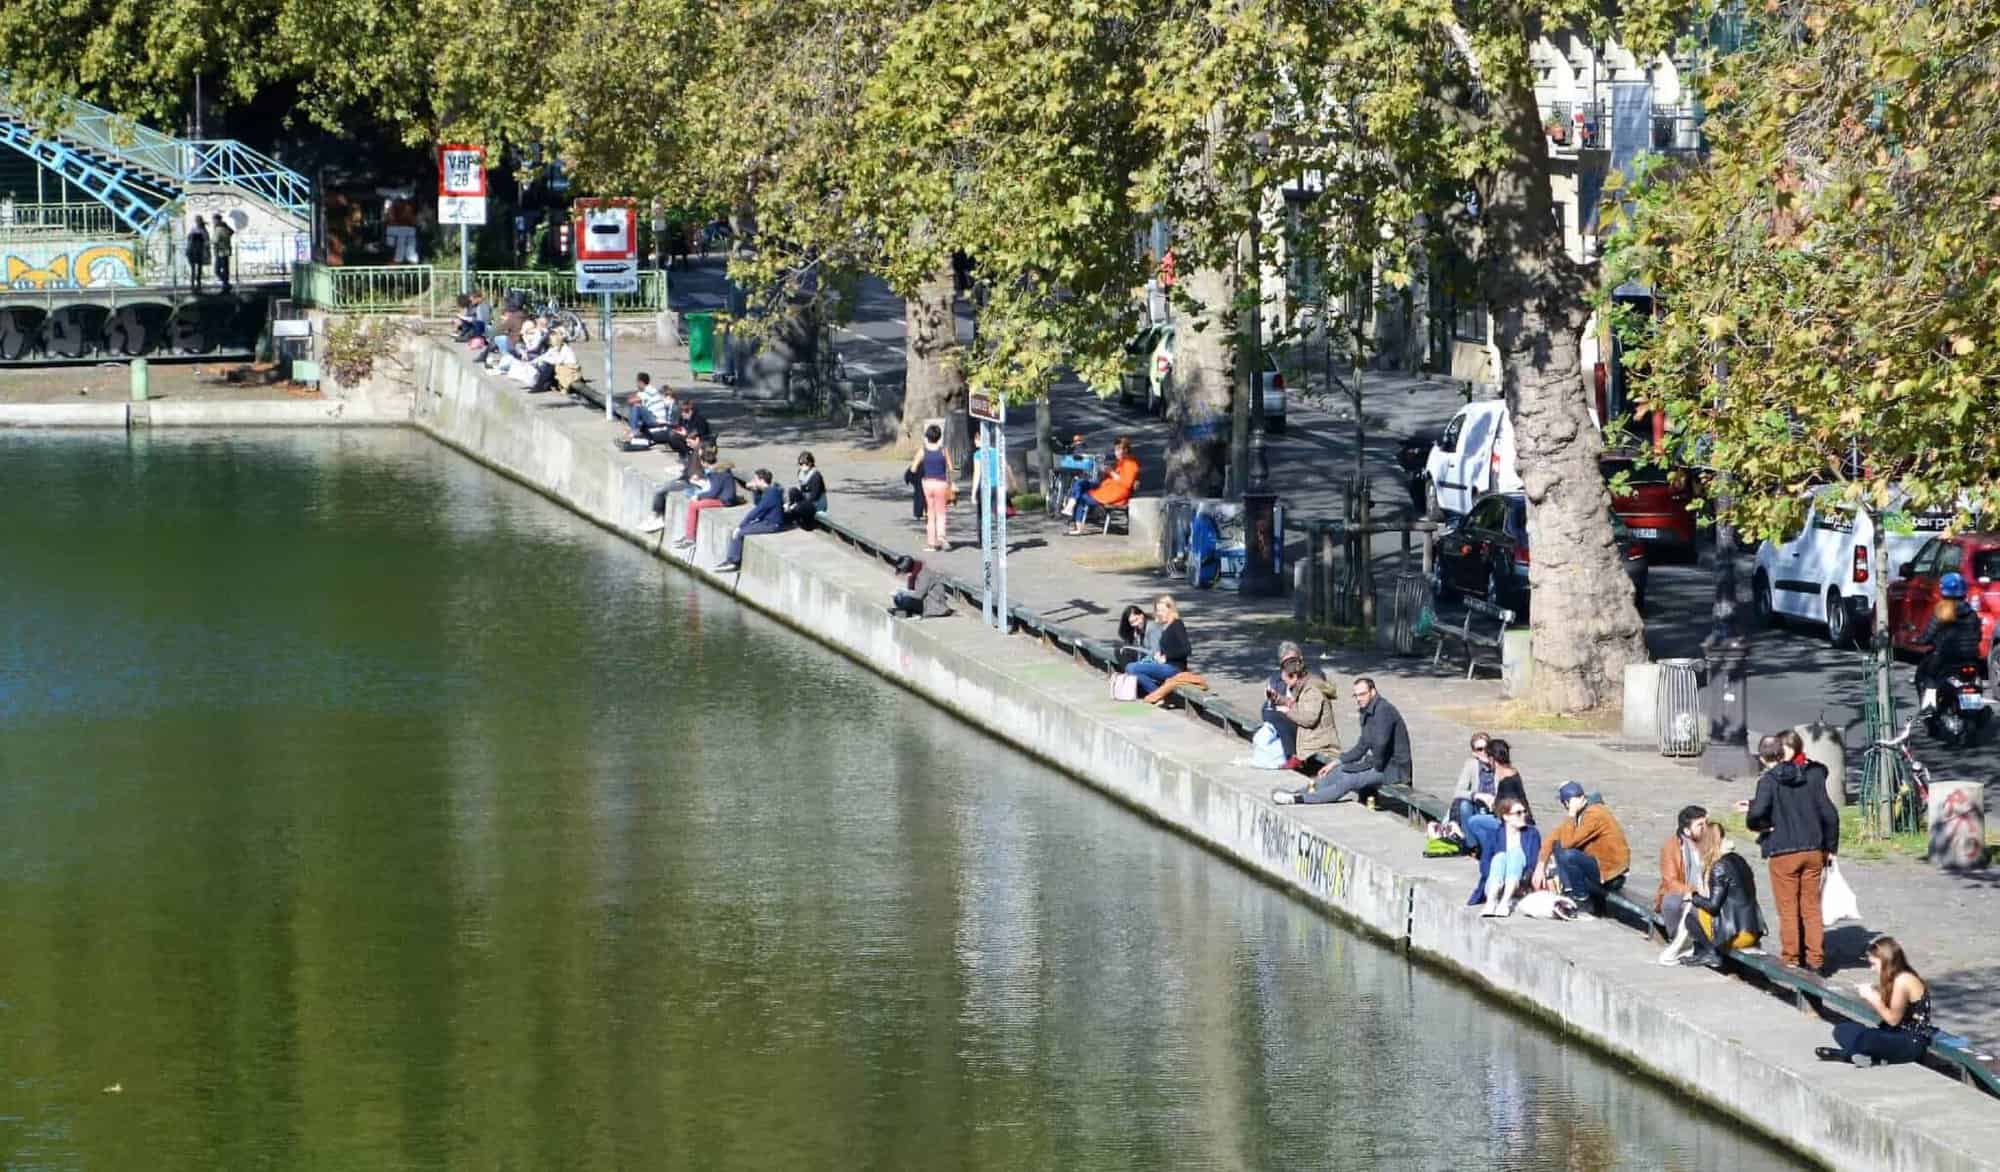 People sitting by a canal on a sunny day.